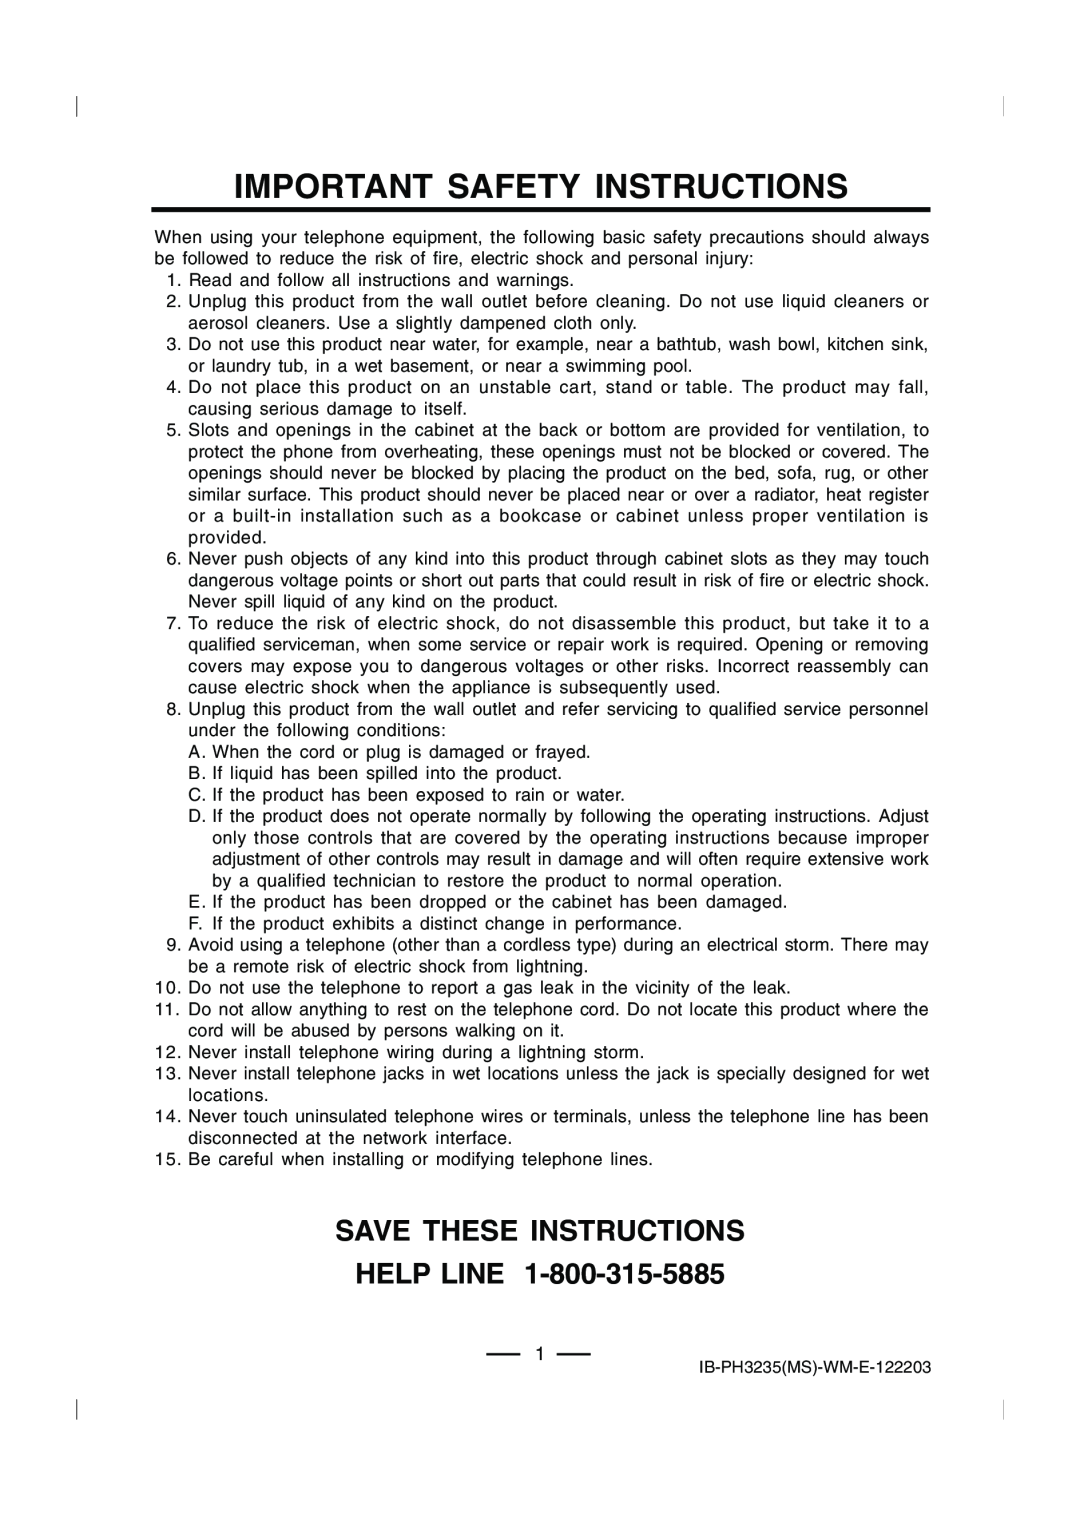 Lenoxx Electronics PH-3235 operating instructions Important Safety Instructions, Save These Instructions Help Line 